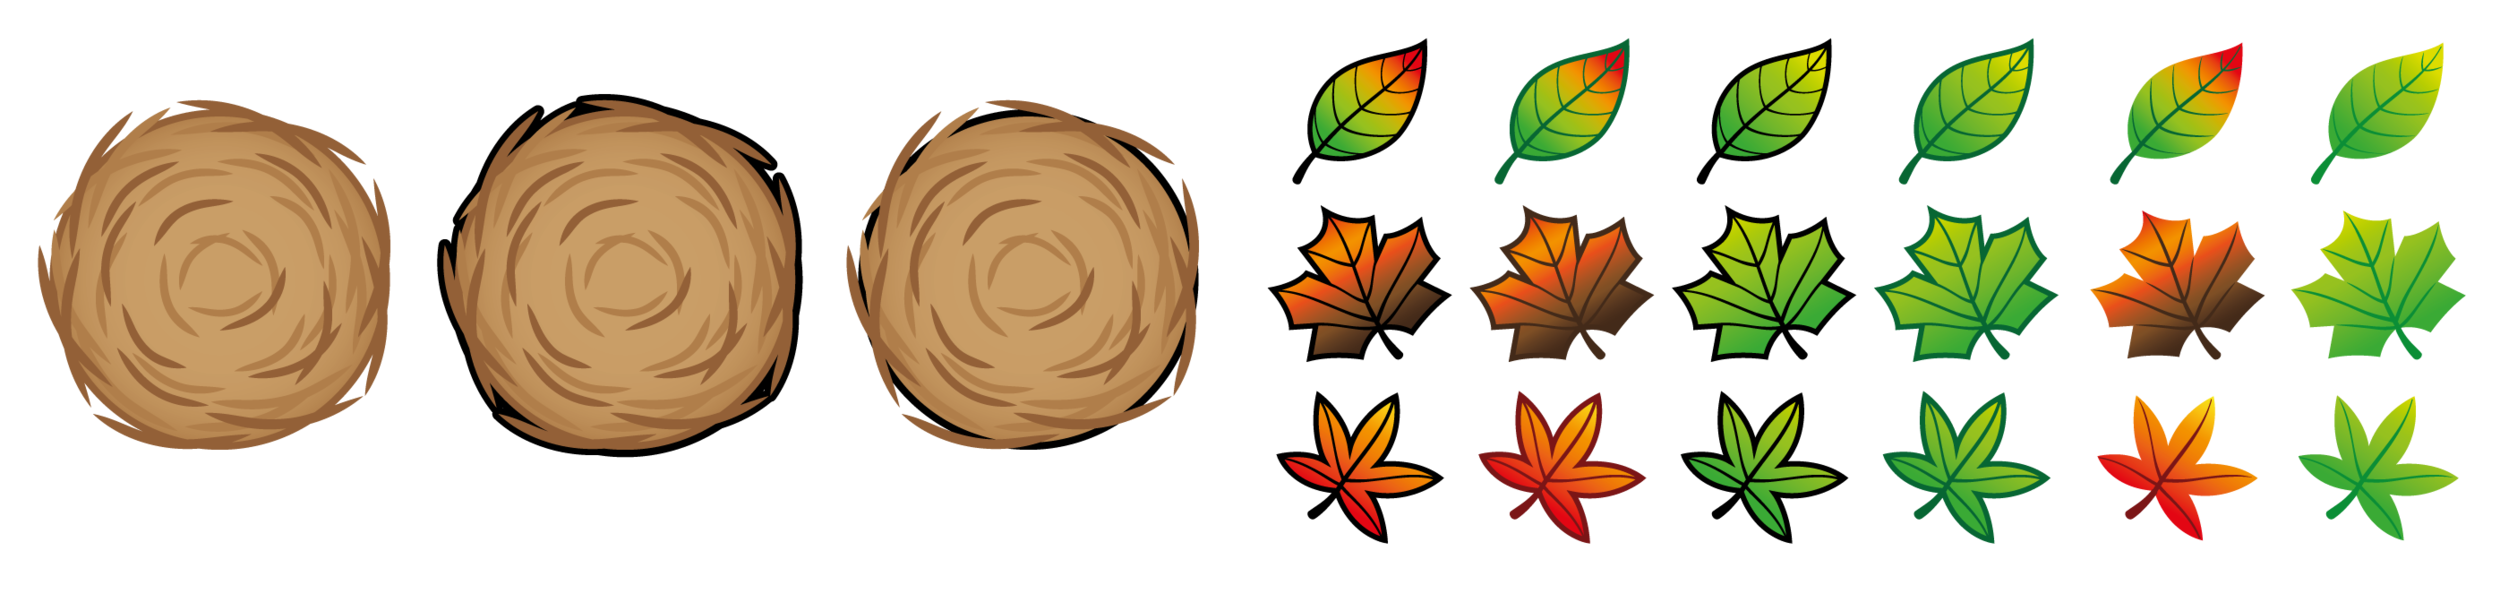 HayBales-Leaves-01.png